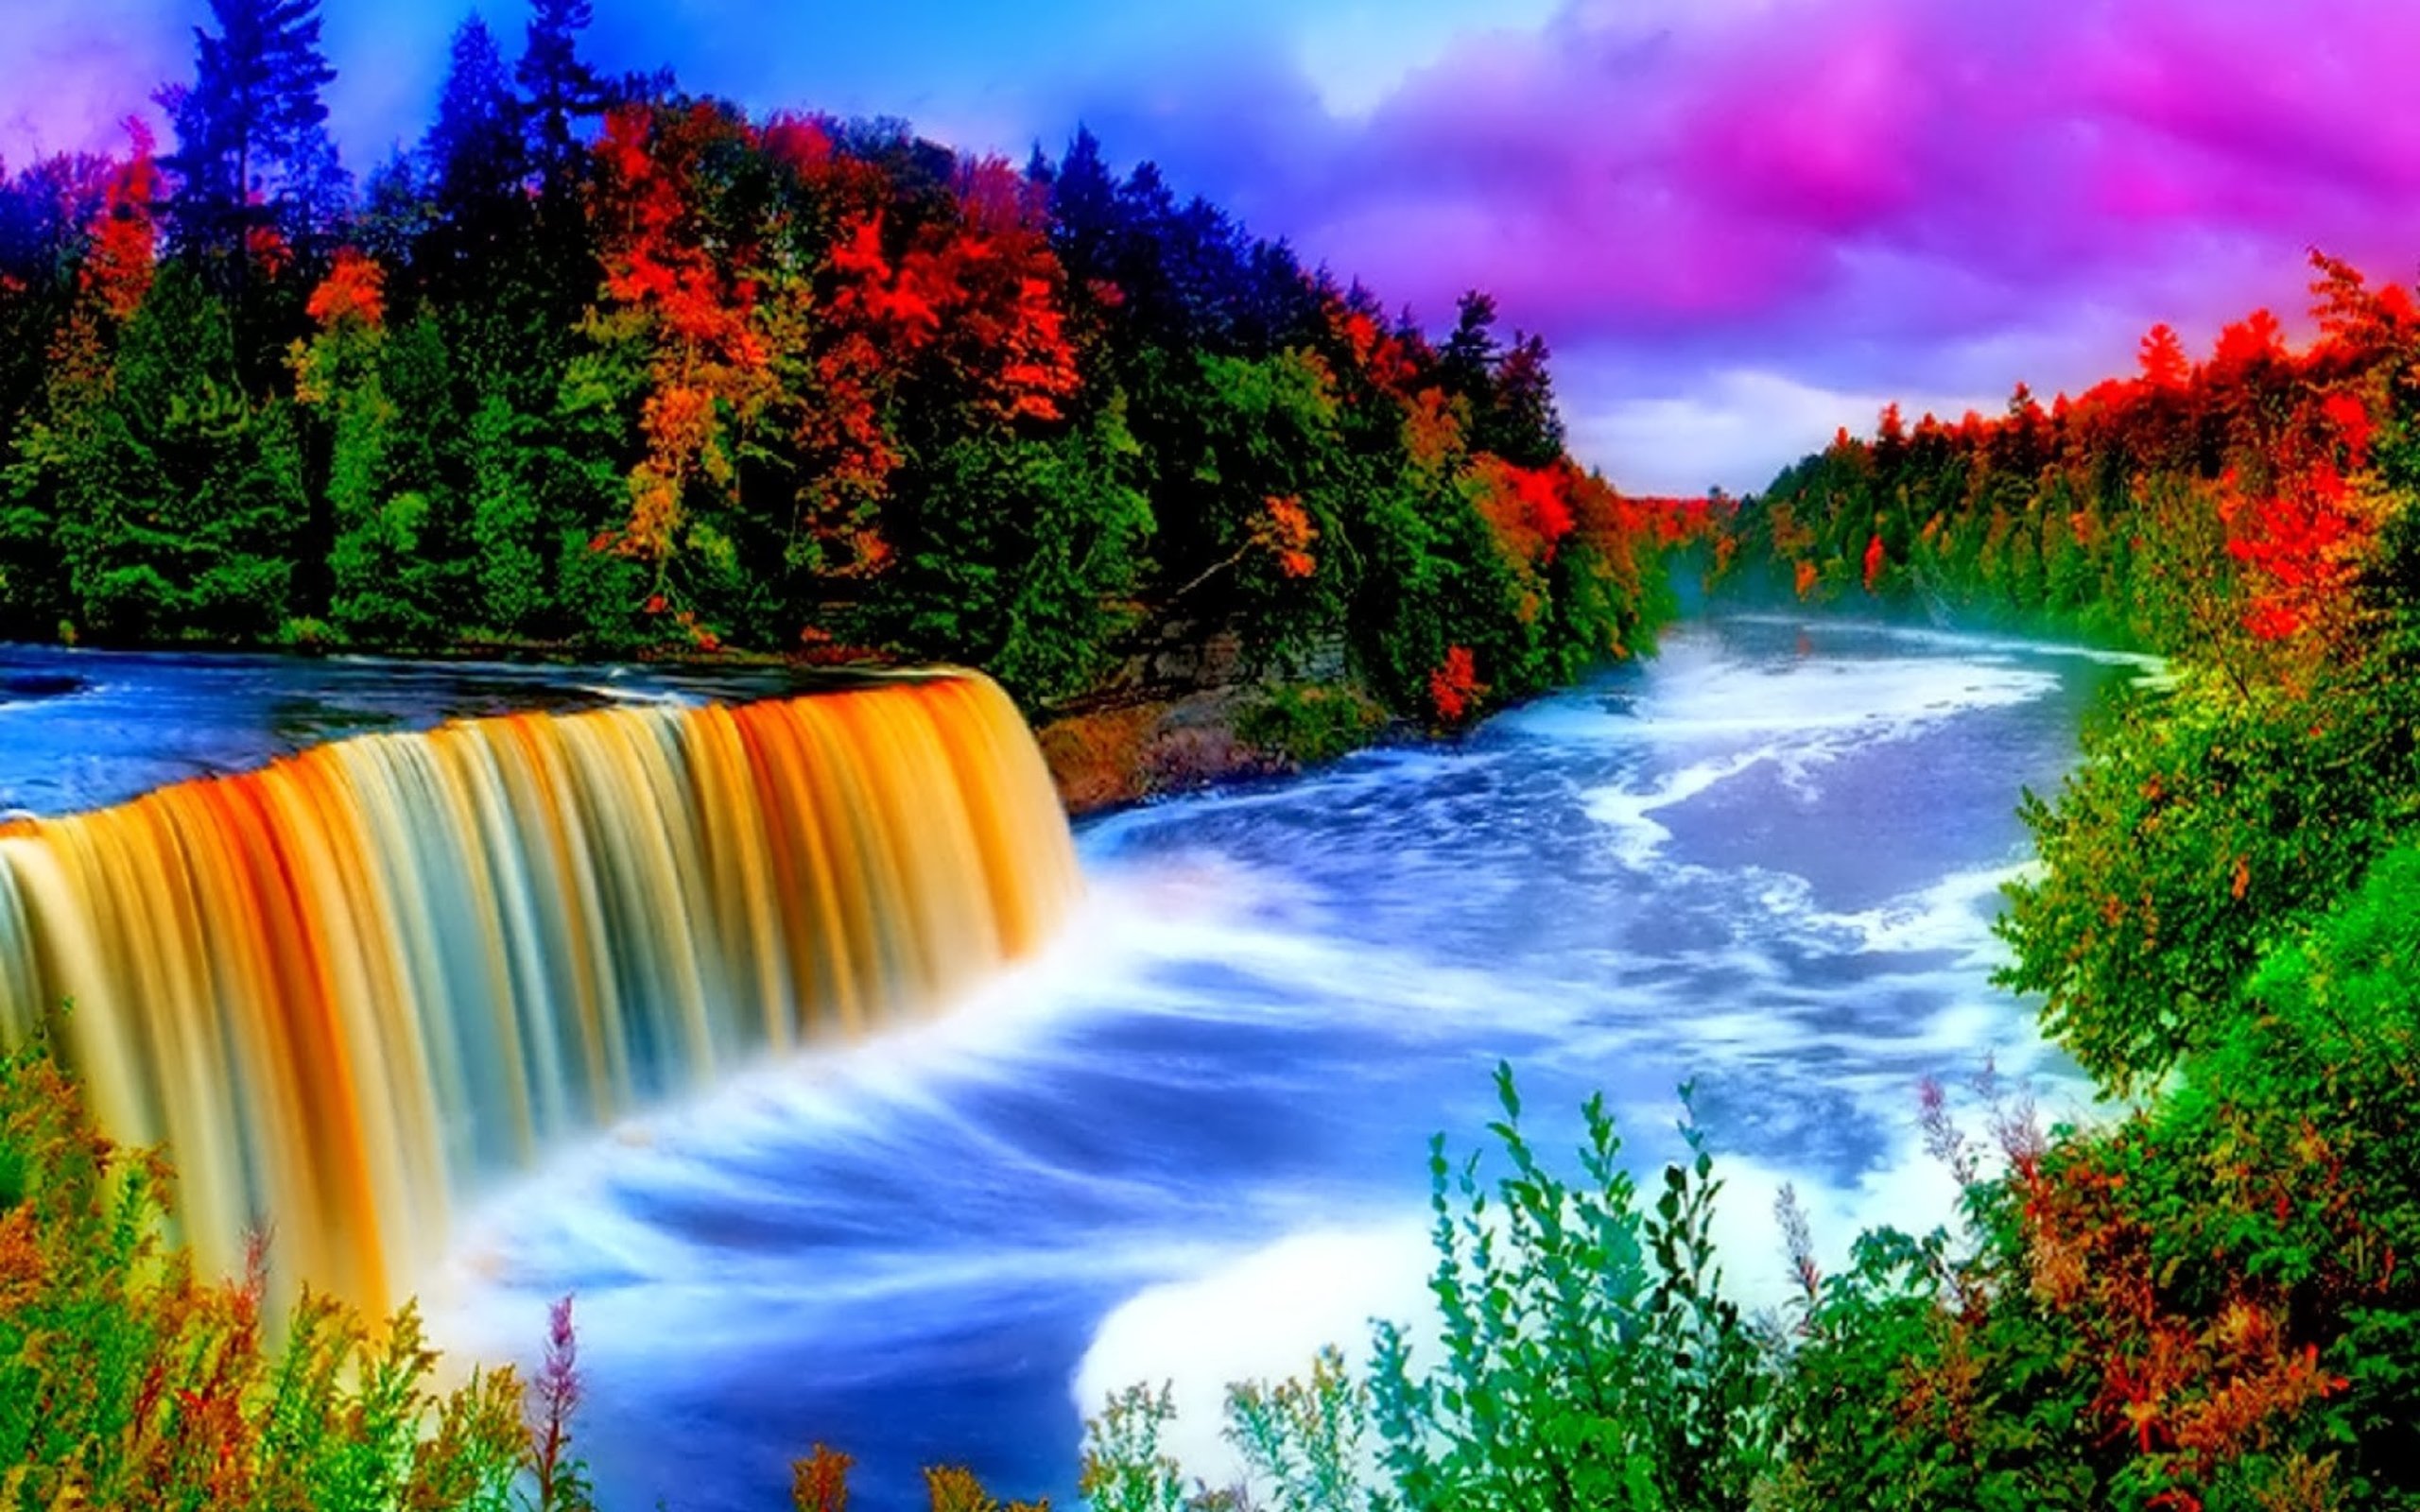 Wallpaper Water Falls Surrounded by Trees Under Blue Sky, Background Free Image